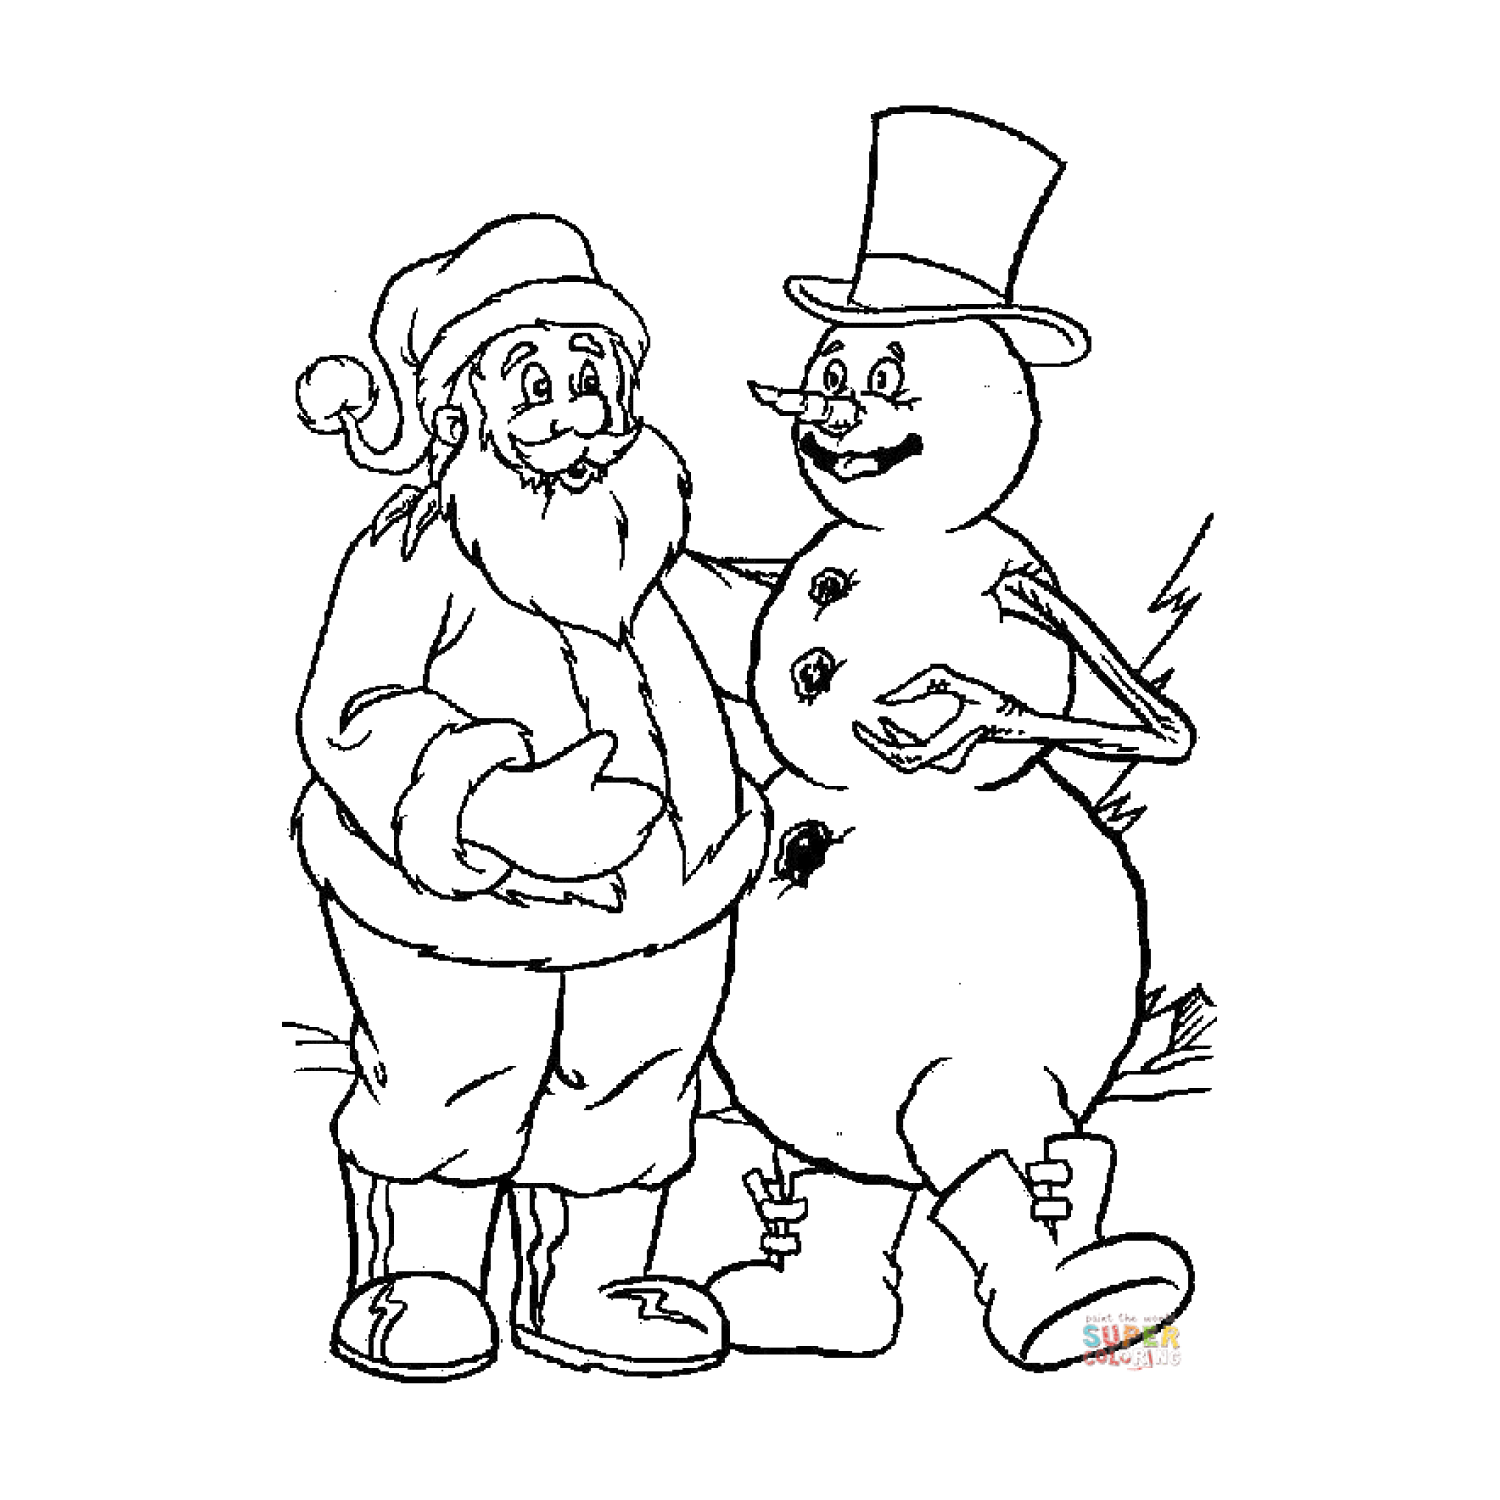 Santa and the Snowman coloring page cover image.